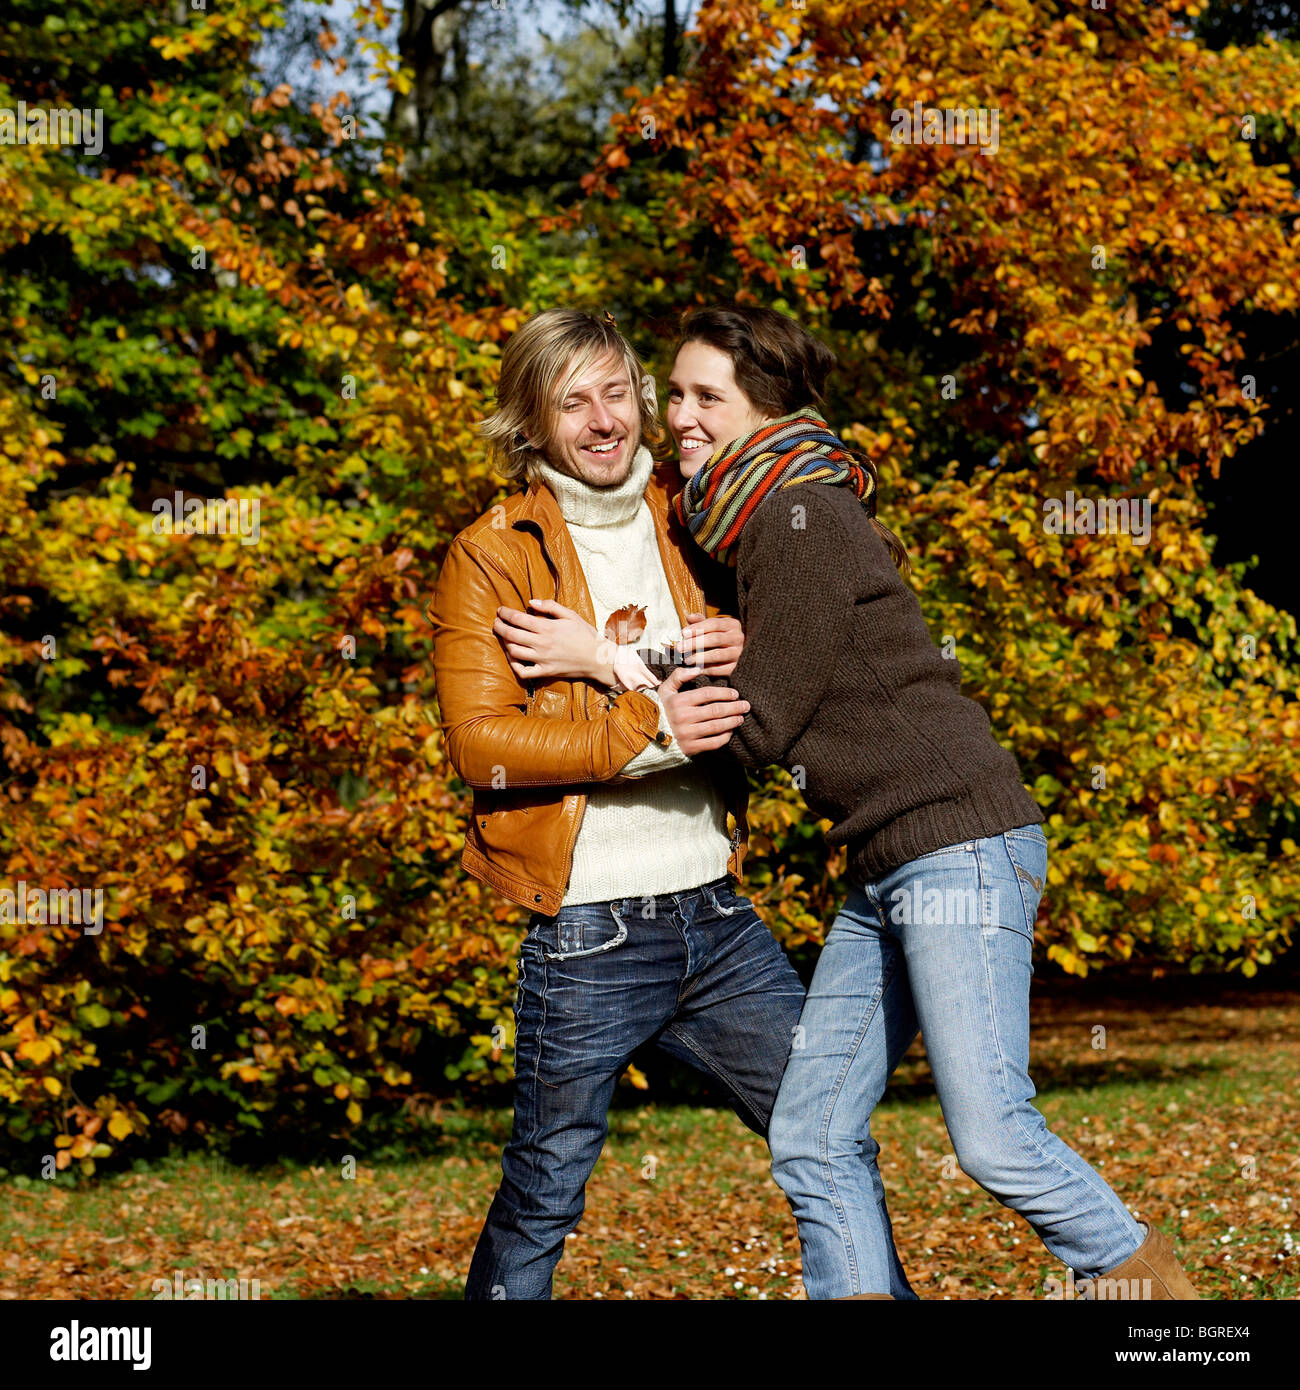 A young couple in love, Skane, Sweden. Stock Photo